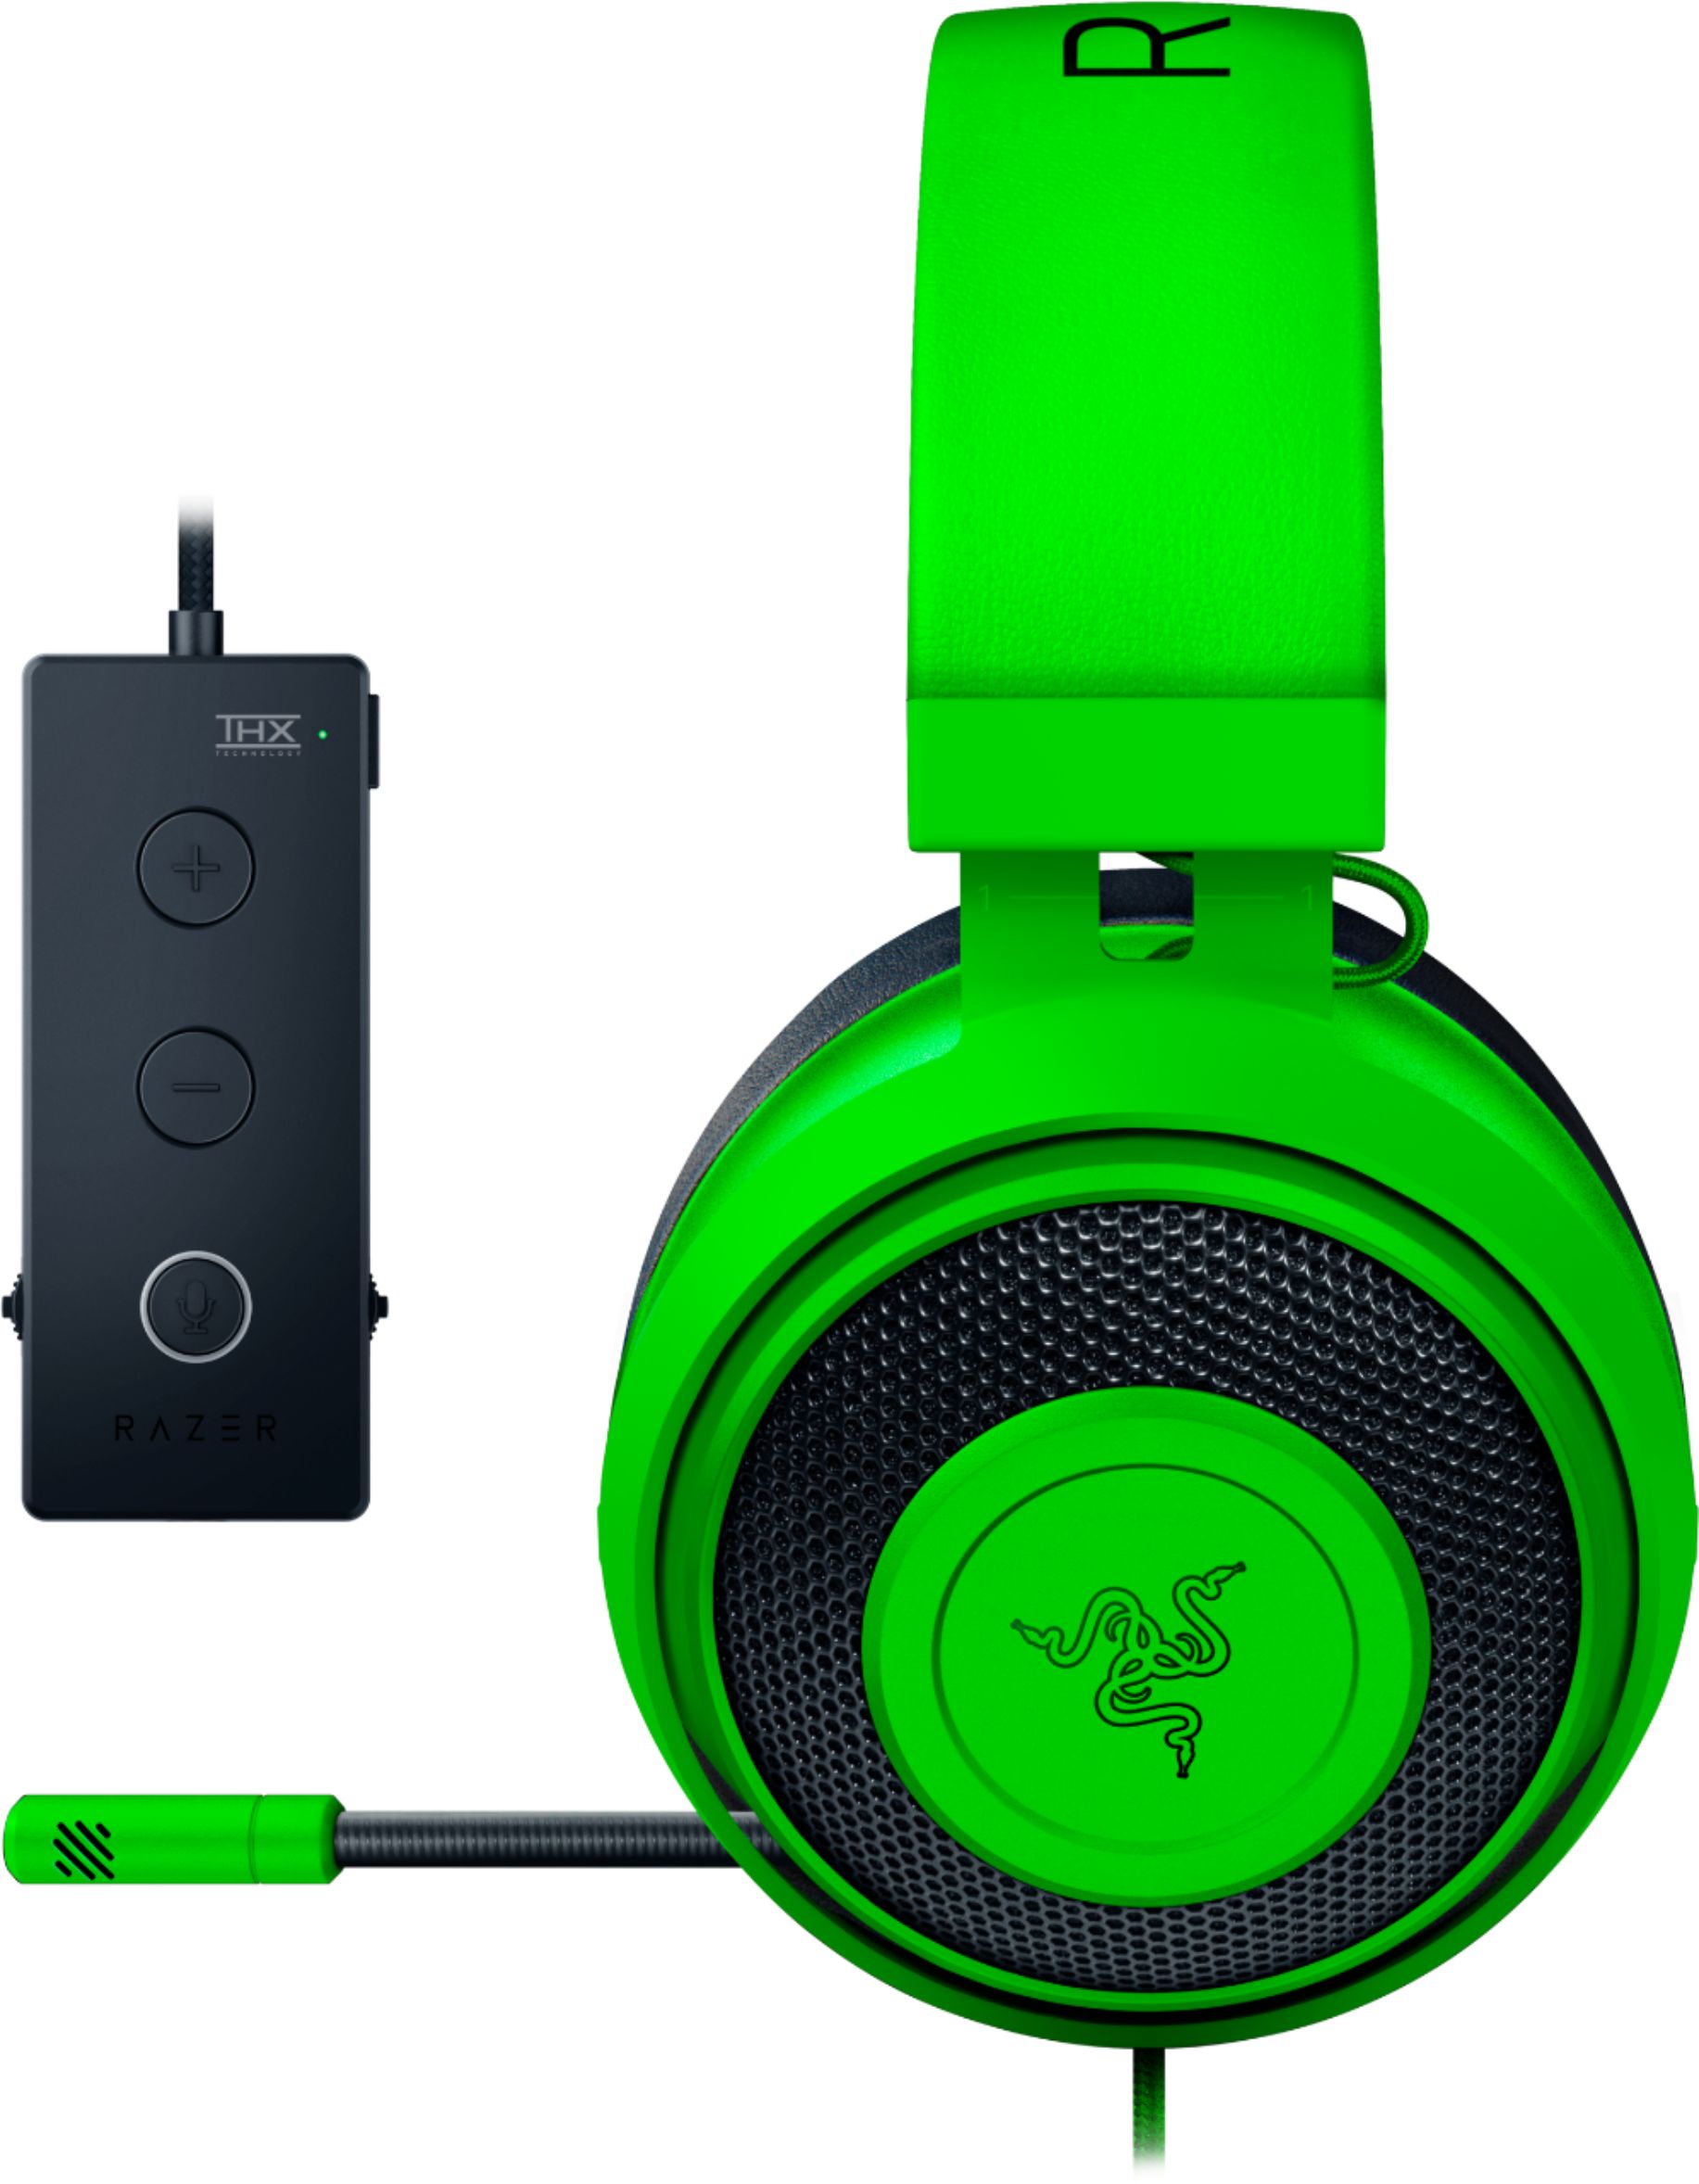  Razer Kraken Gaming Headset: Lightweight Aluminum Frame,  Retractable Noise Isolating Microphone, For PC, PS4, PS5, Switch, Xbox One,  Xbox Series X & S, Mobile, 3.5 mm Audio Jack – Green 